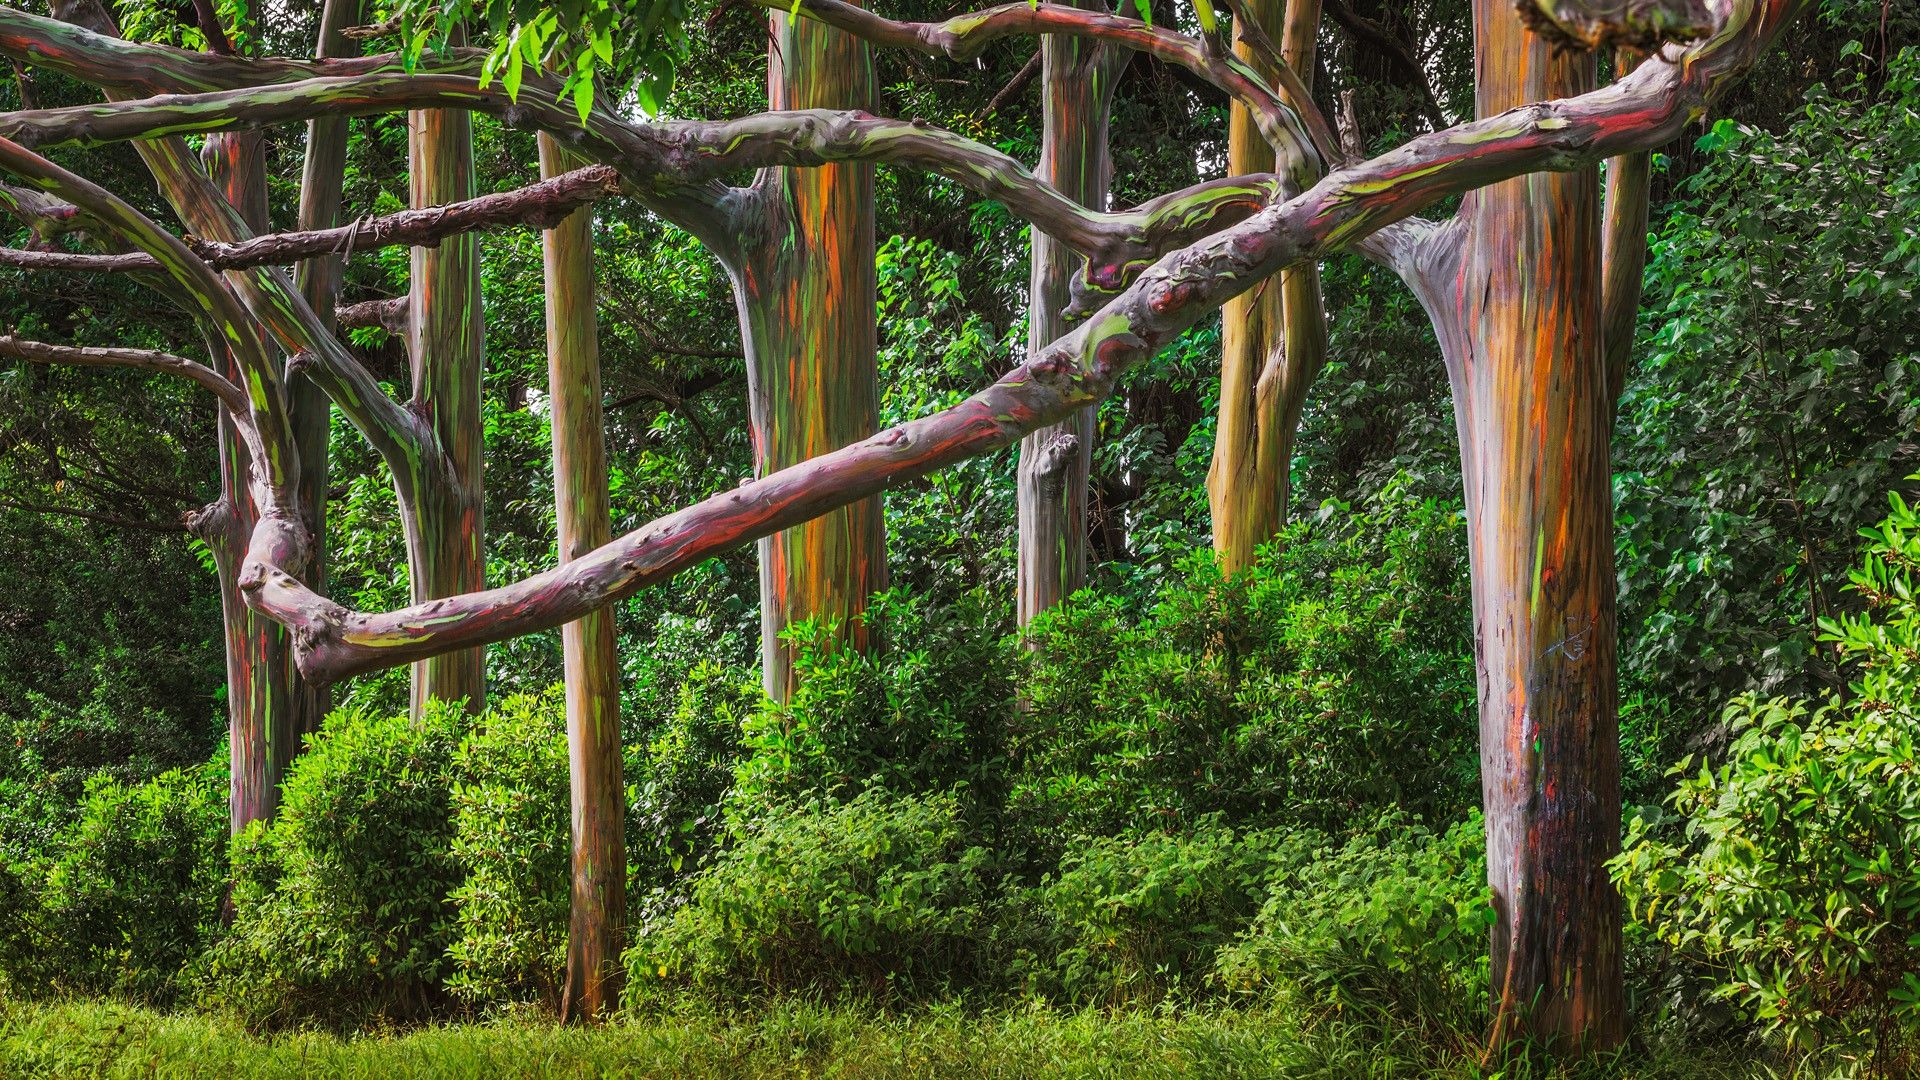 The Painted Forest, Eucalyptus Forest, Maui [1920x1080]